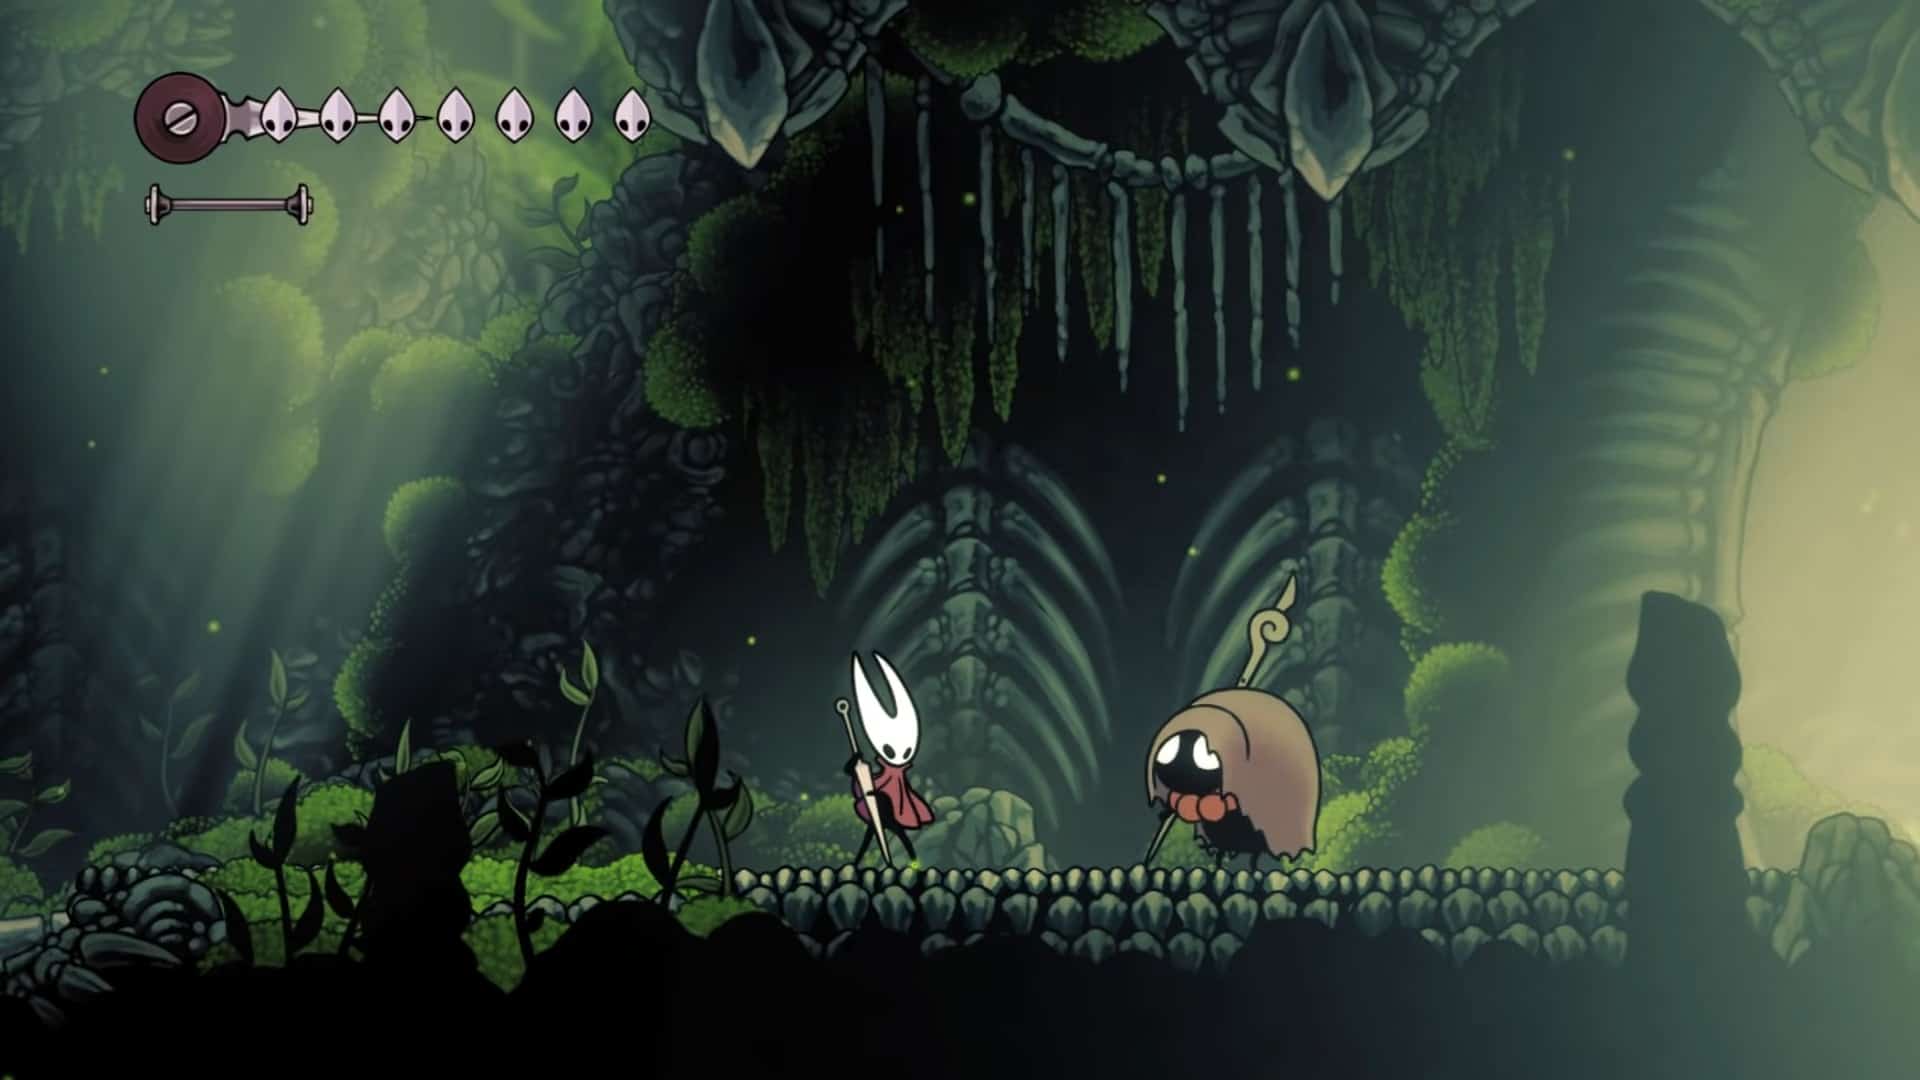 Hollow Knight: Silksong Confirmed for PS5 and PS4